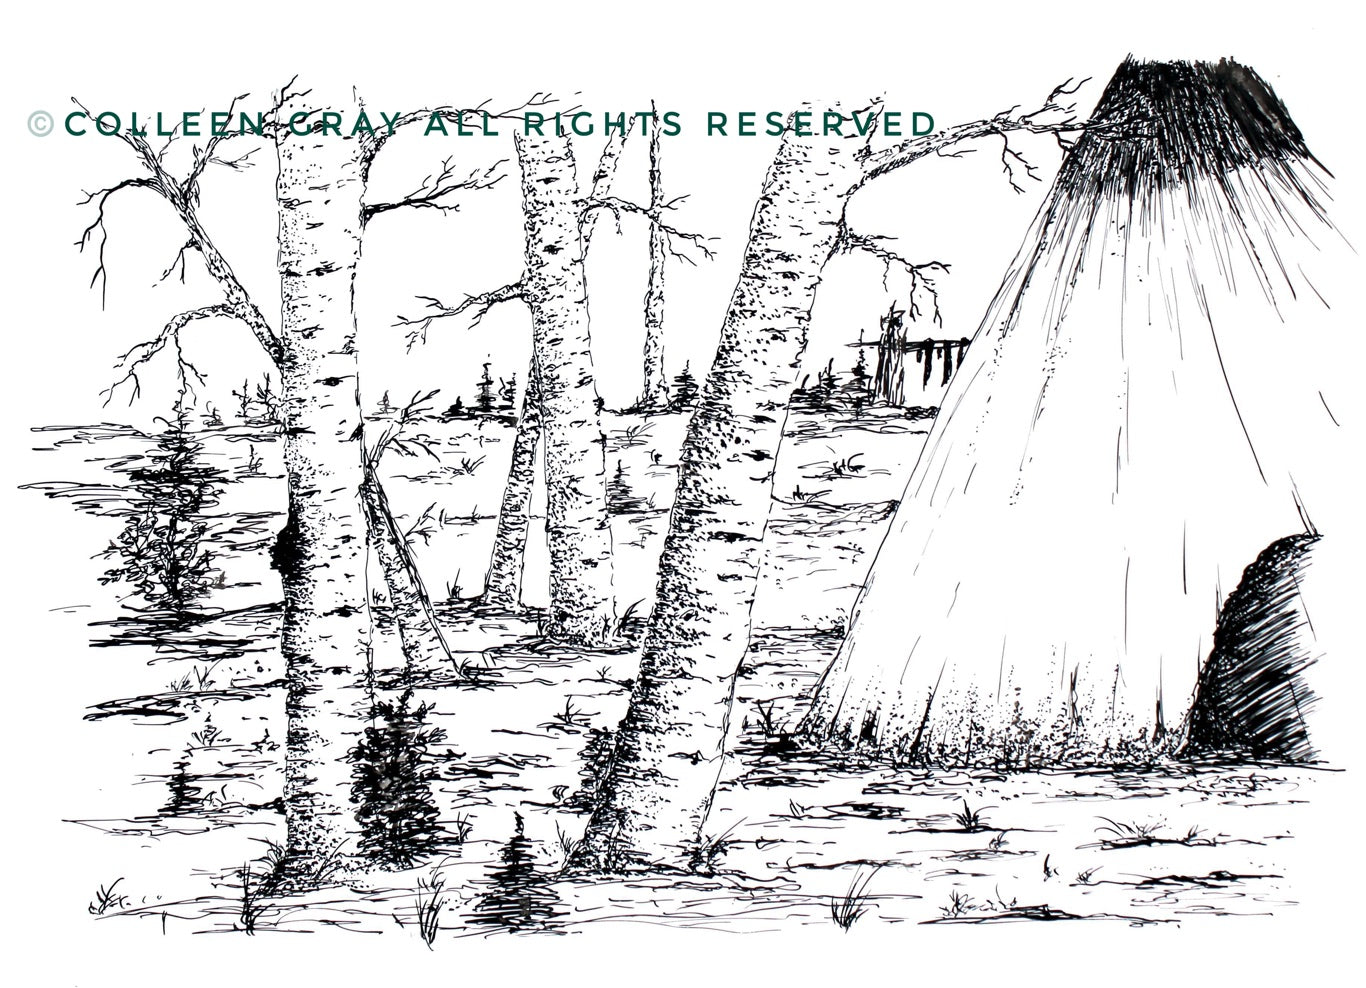 Image of Title: Home 16x20 archival print by Metis Artist Colleen Gray Indigenous Canadian Art Work. Trees, teepee, landscape horizontal. Black & White. For sale at https://artforaidshop.ca